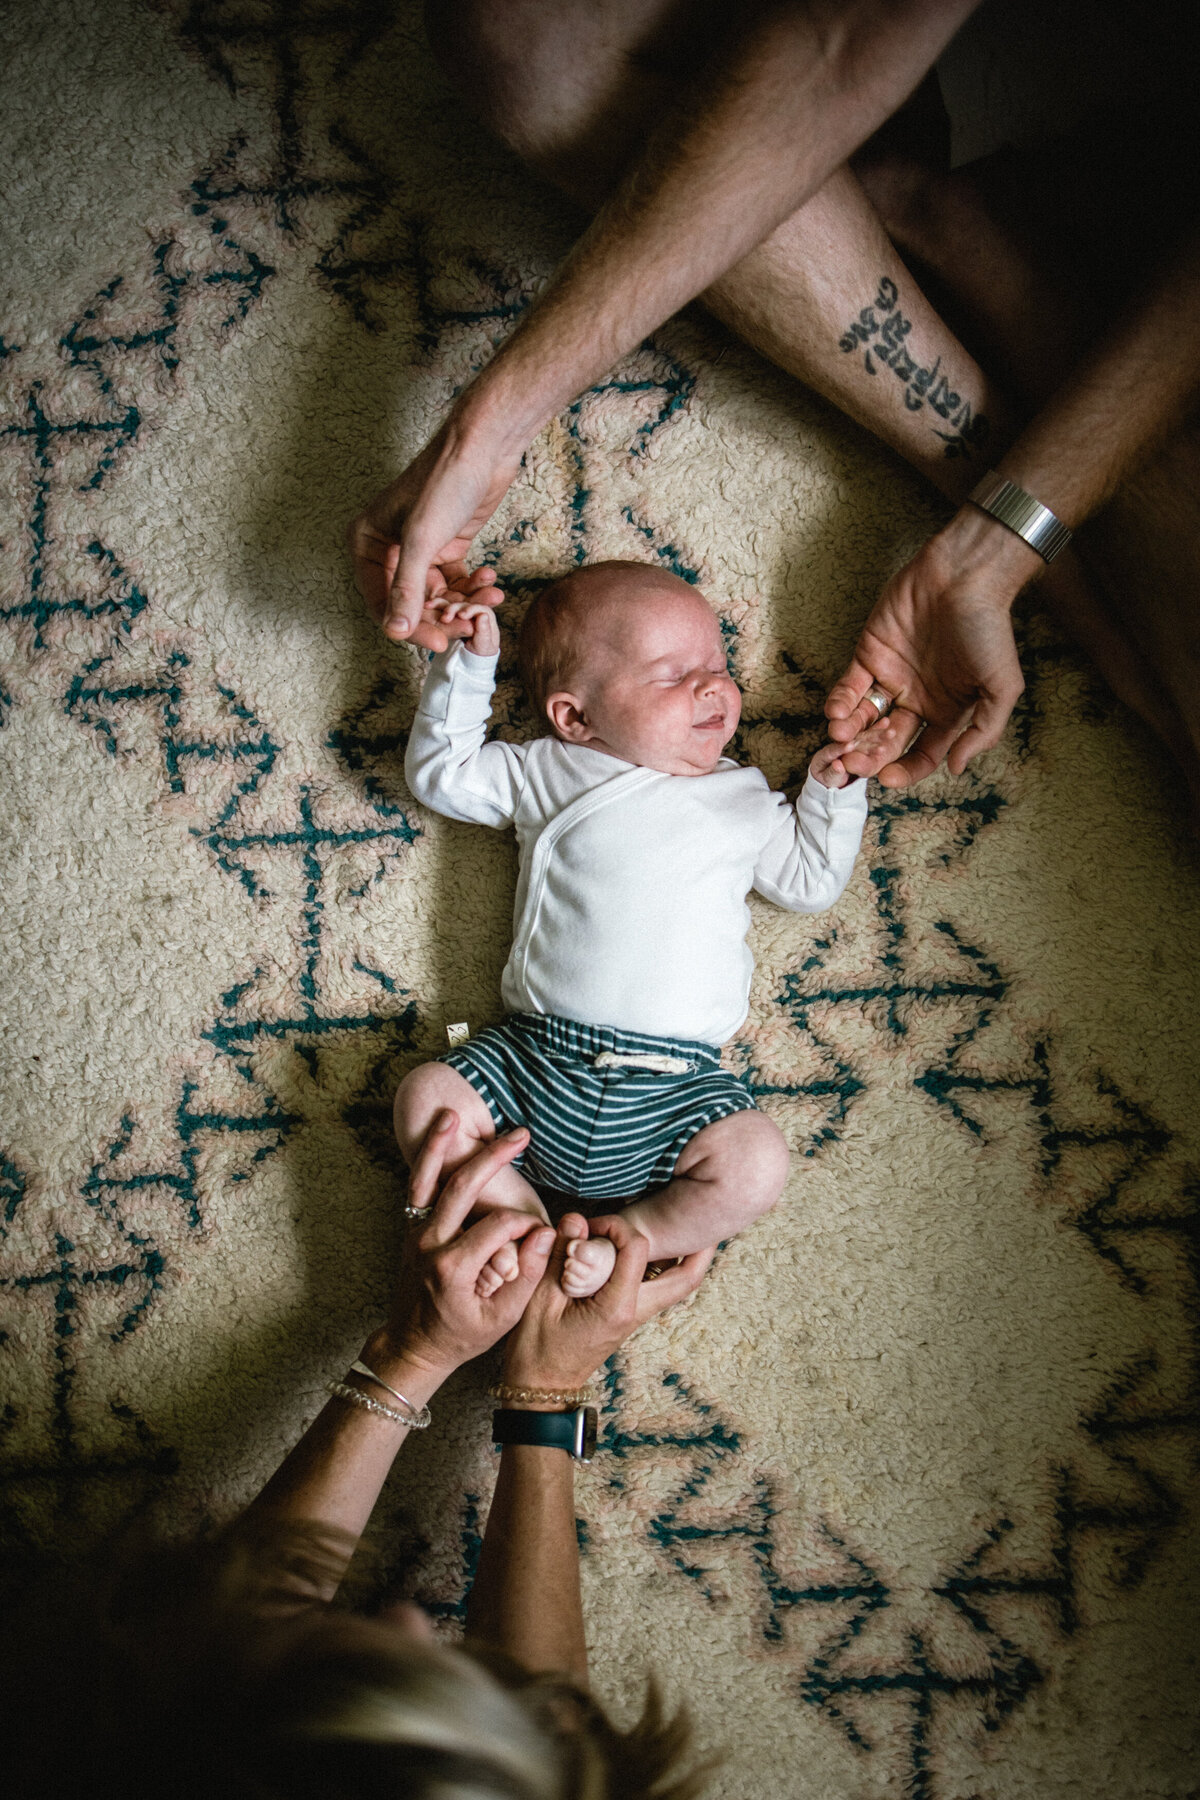 Mom and dad holding newborn baby's fingers and toes on floor